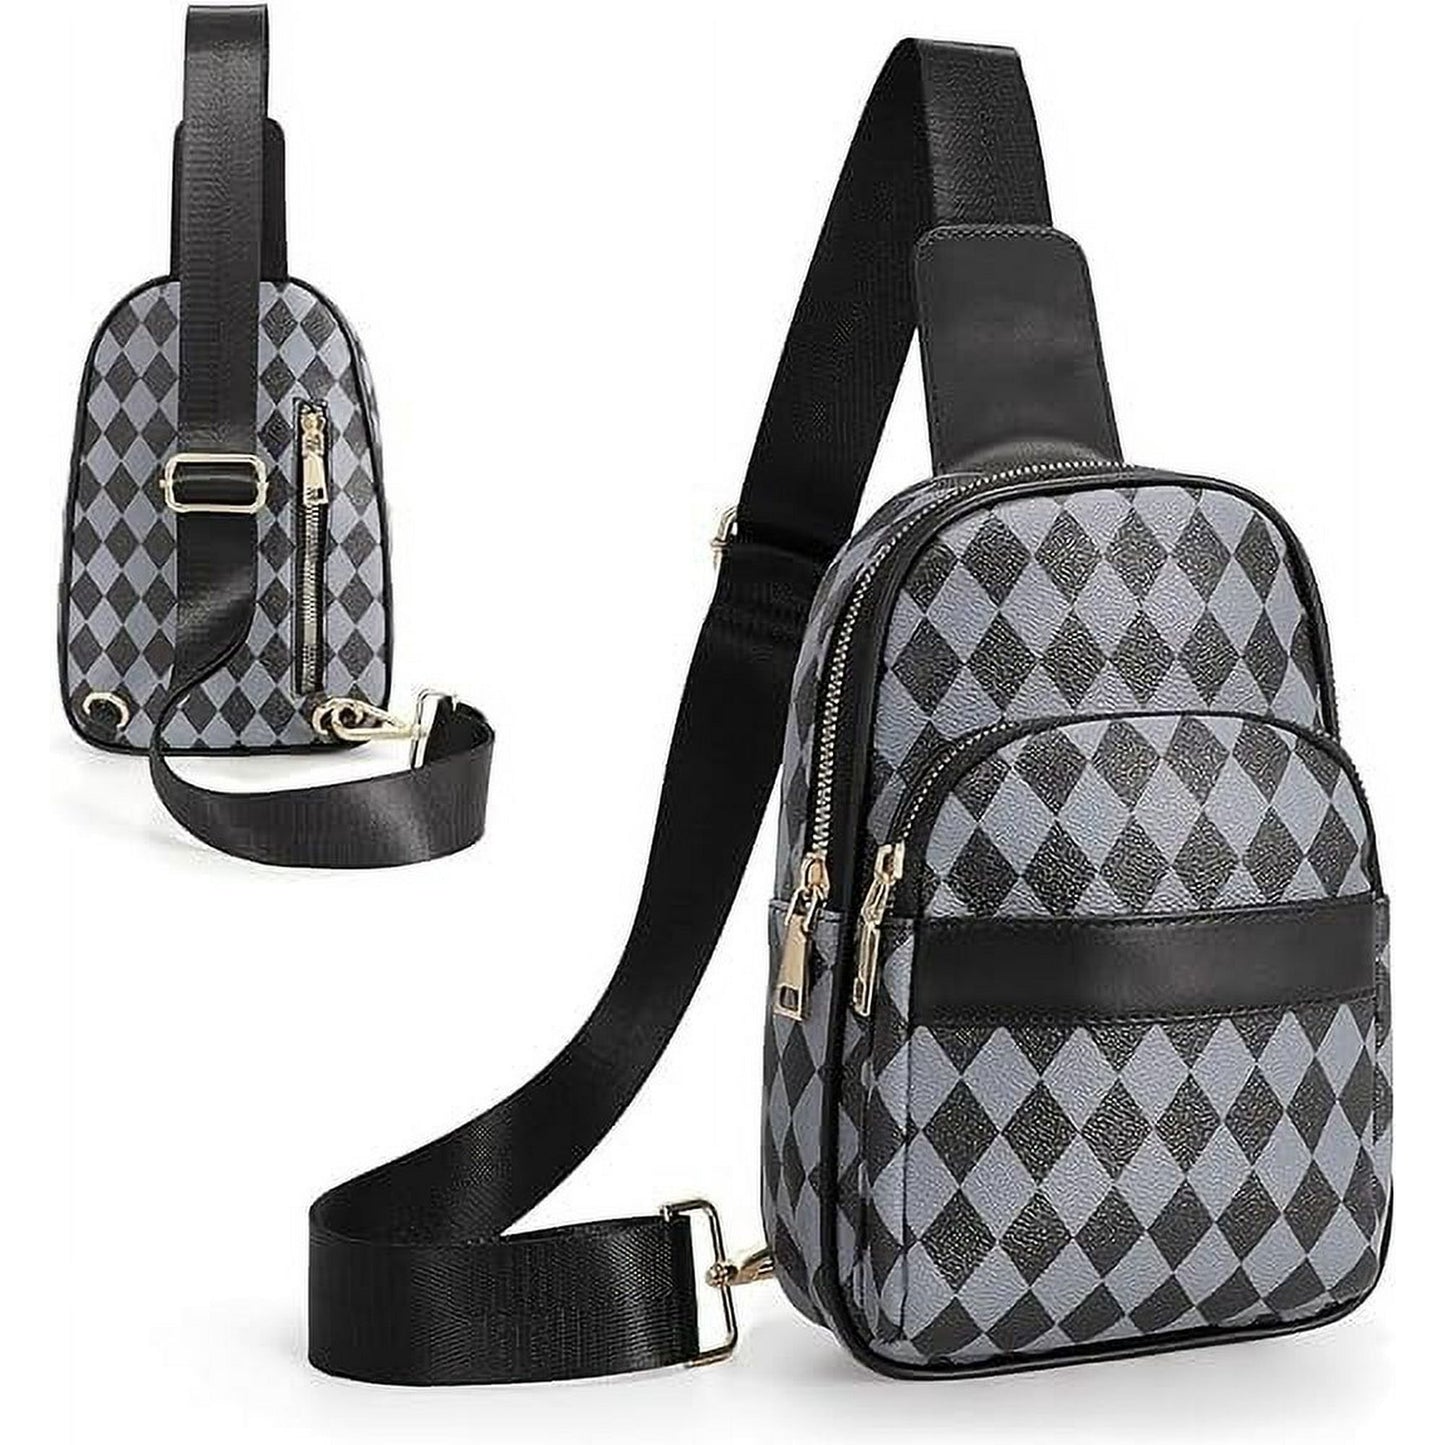 SUOSDEY Sling Bag for Women Fashionable Small Crossbody Checkered Belt Shoulder Backpack Christmas Gifts